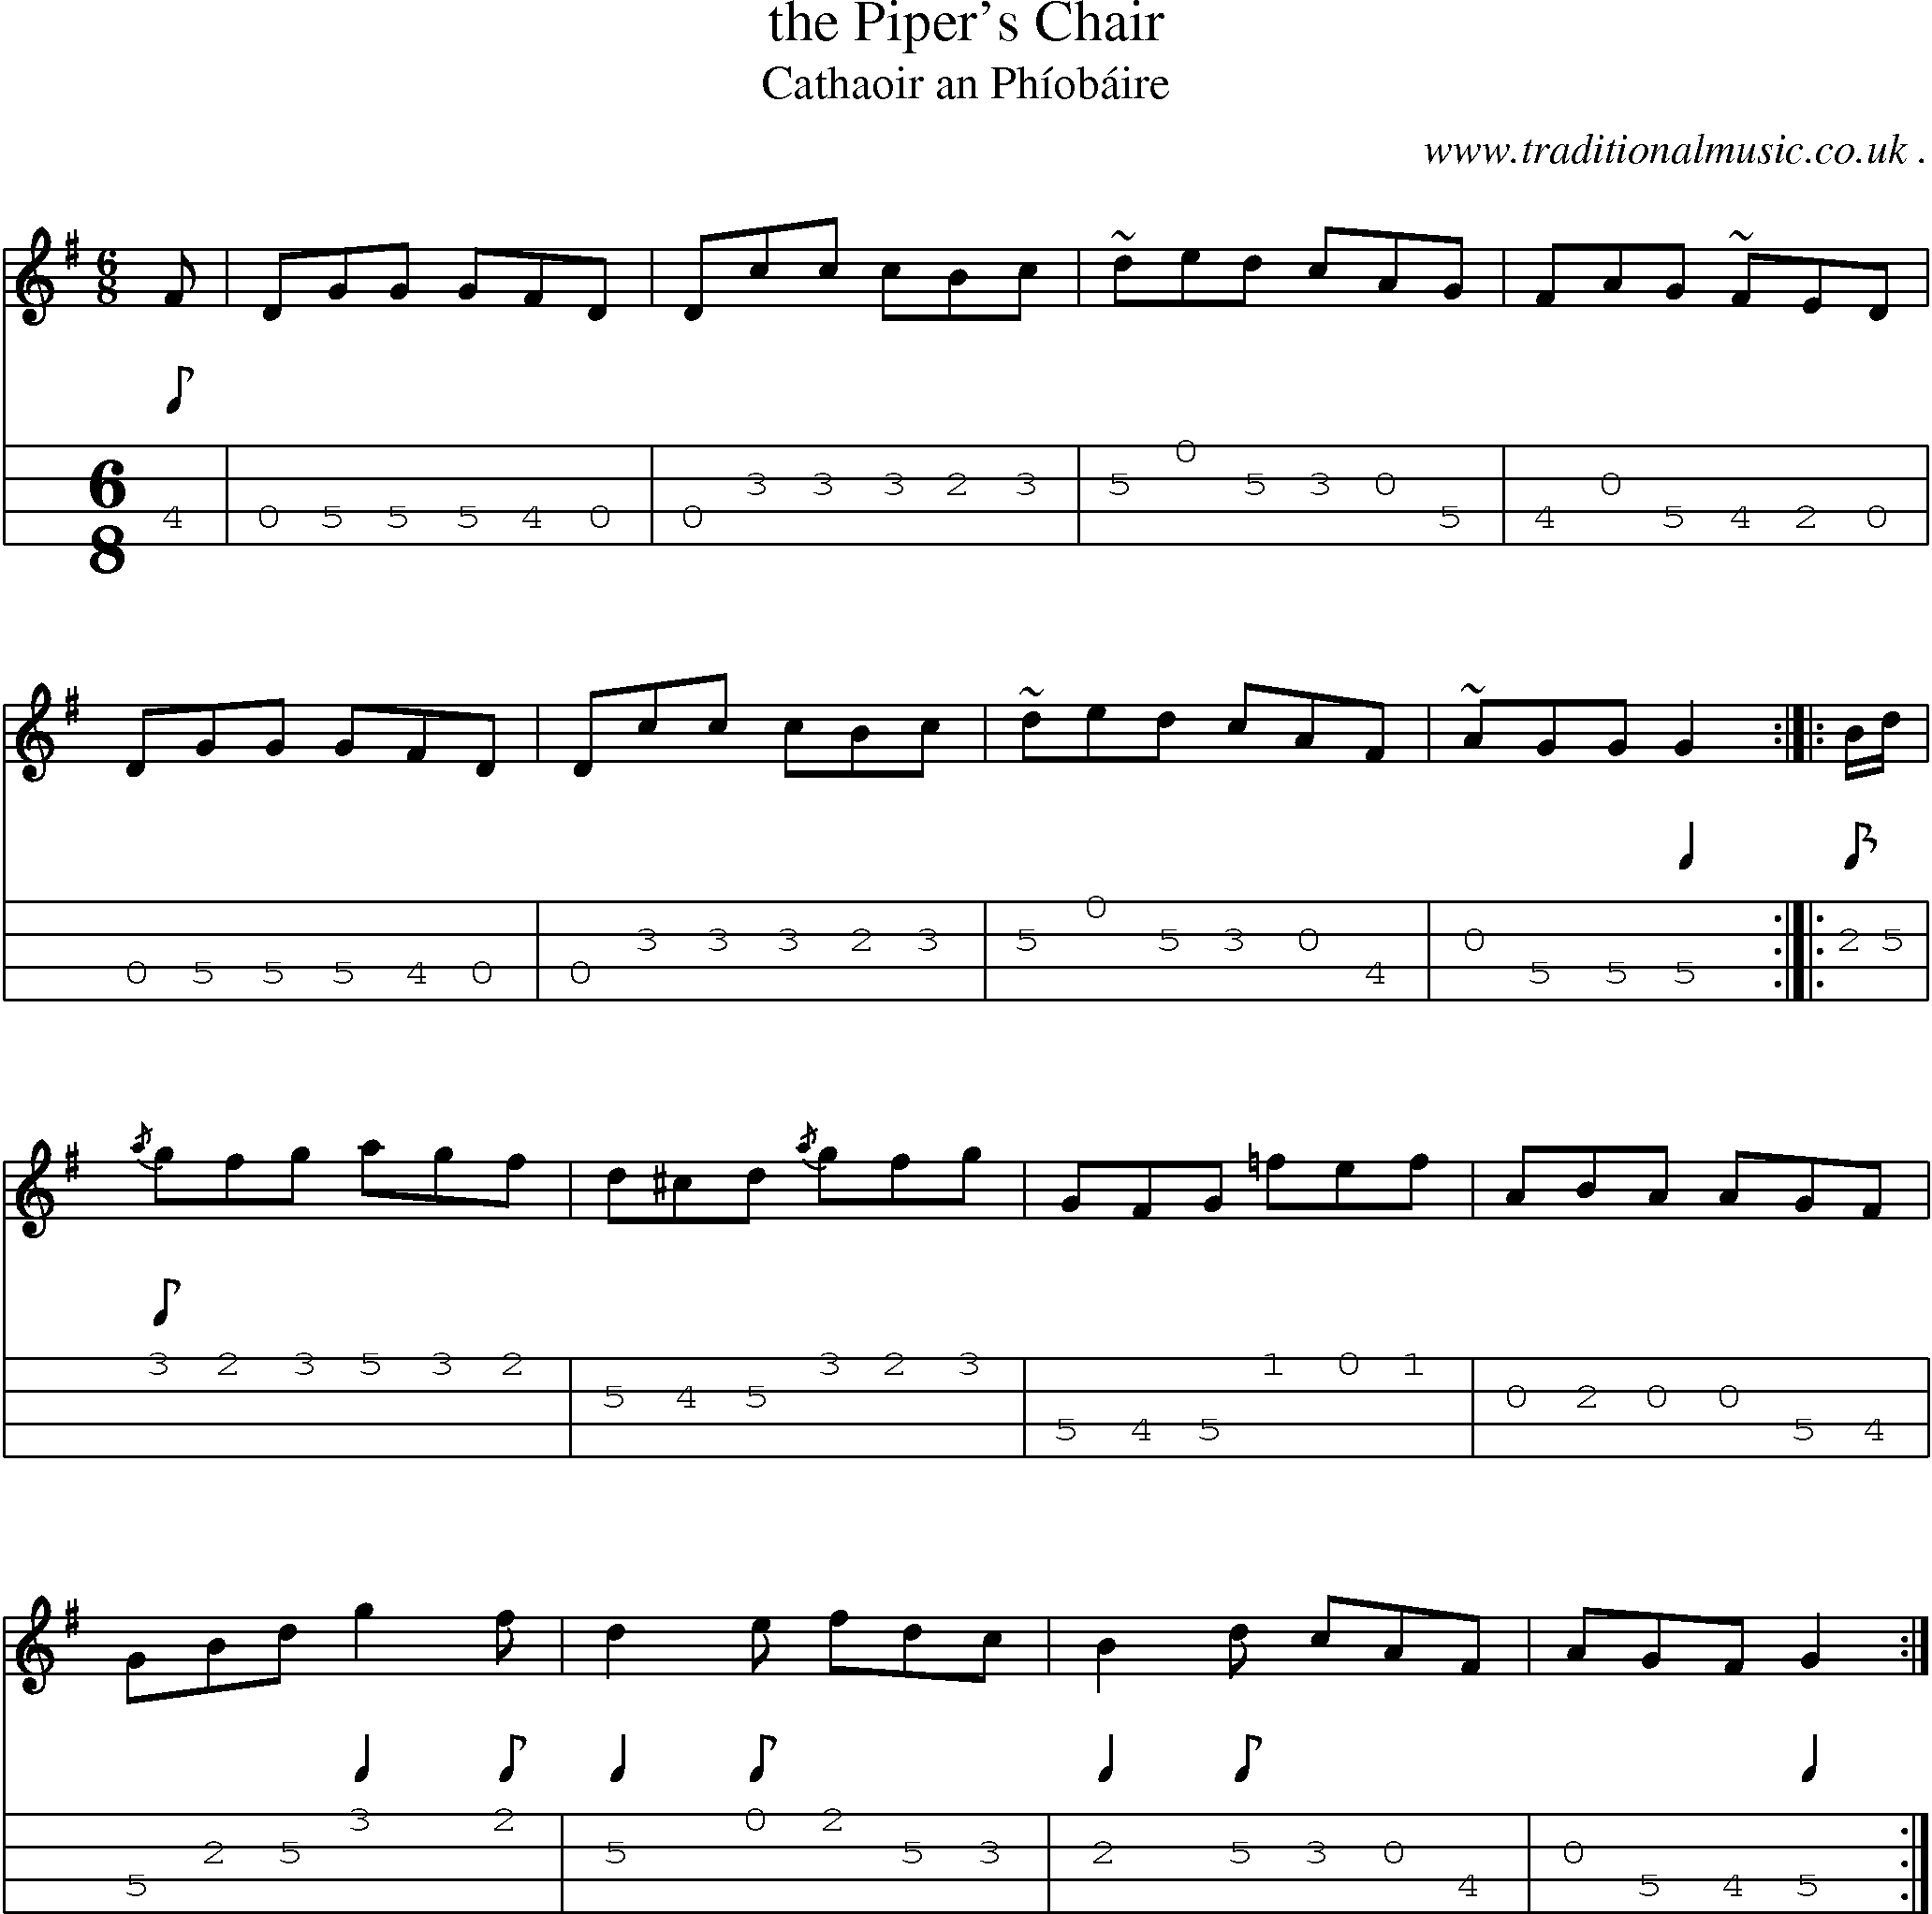 Sheet-music  score, Chords and Mandolin Tabs for The Pipers Chair